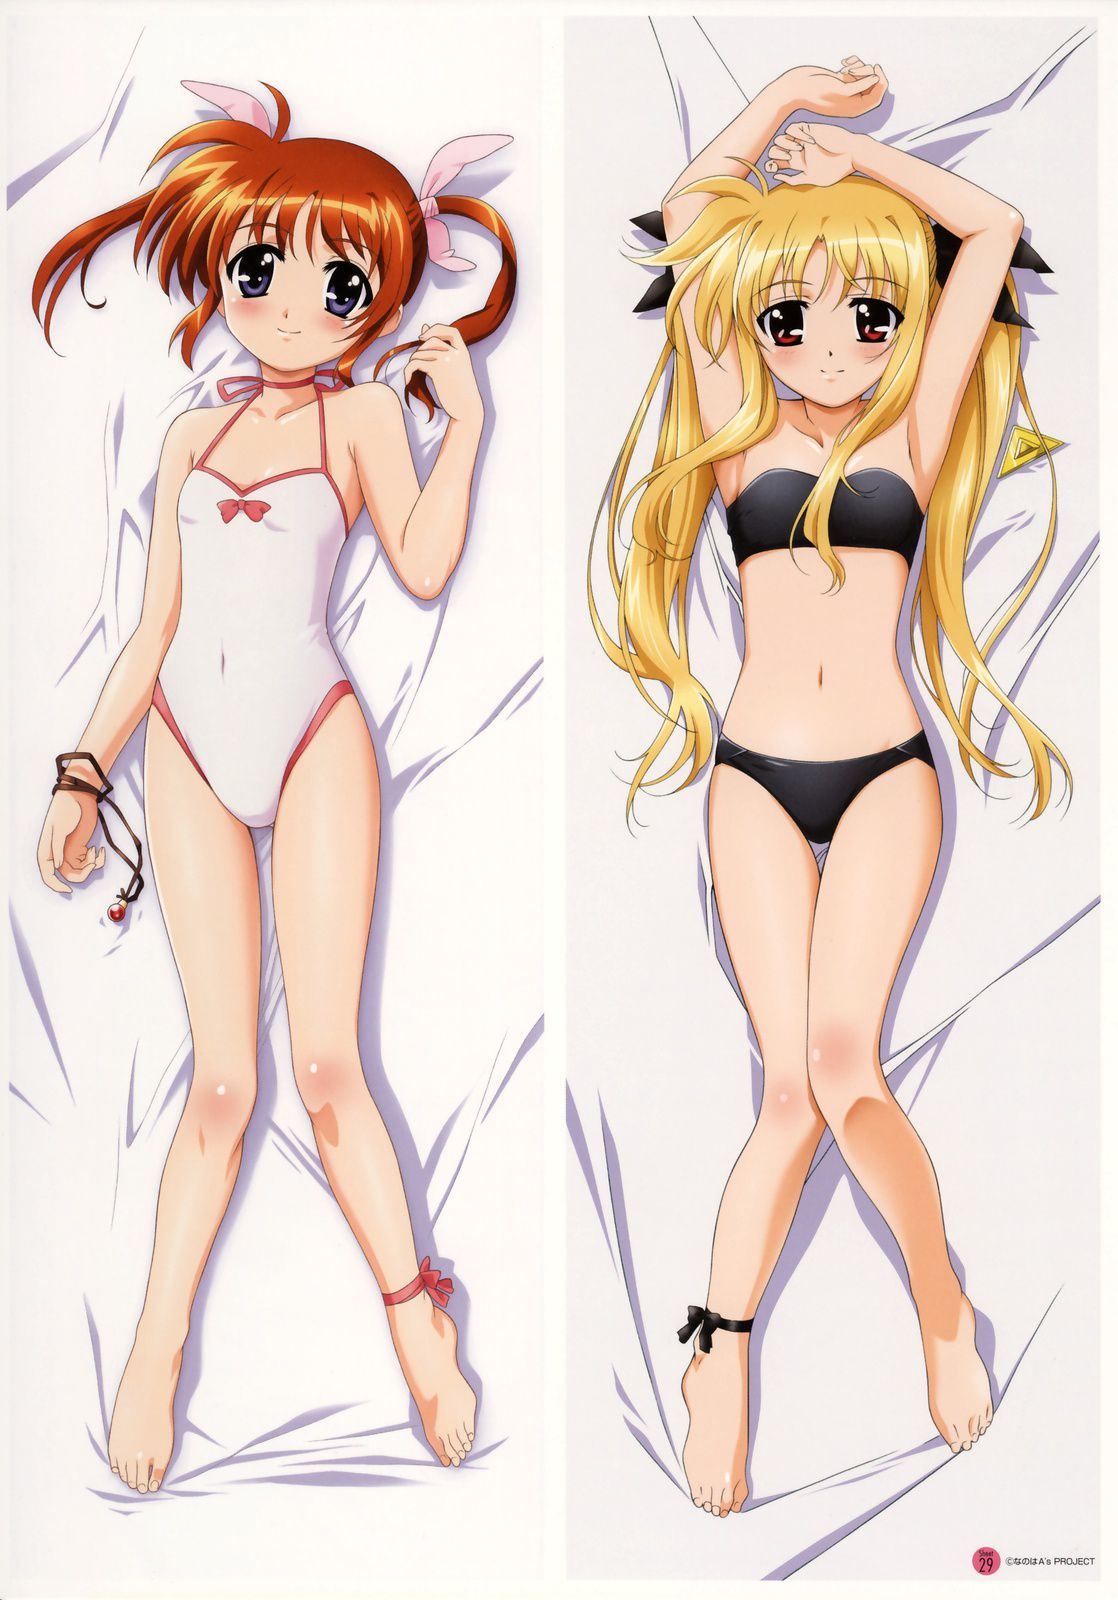 [Mahou Shoujo Lyrical Nanoha] is erotic image that you know the appeal of naughty 20